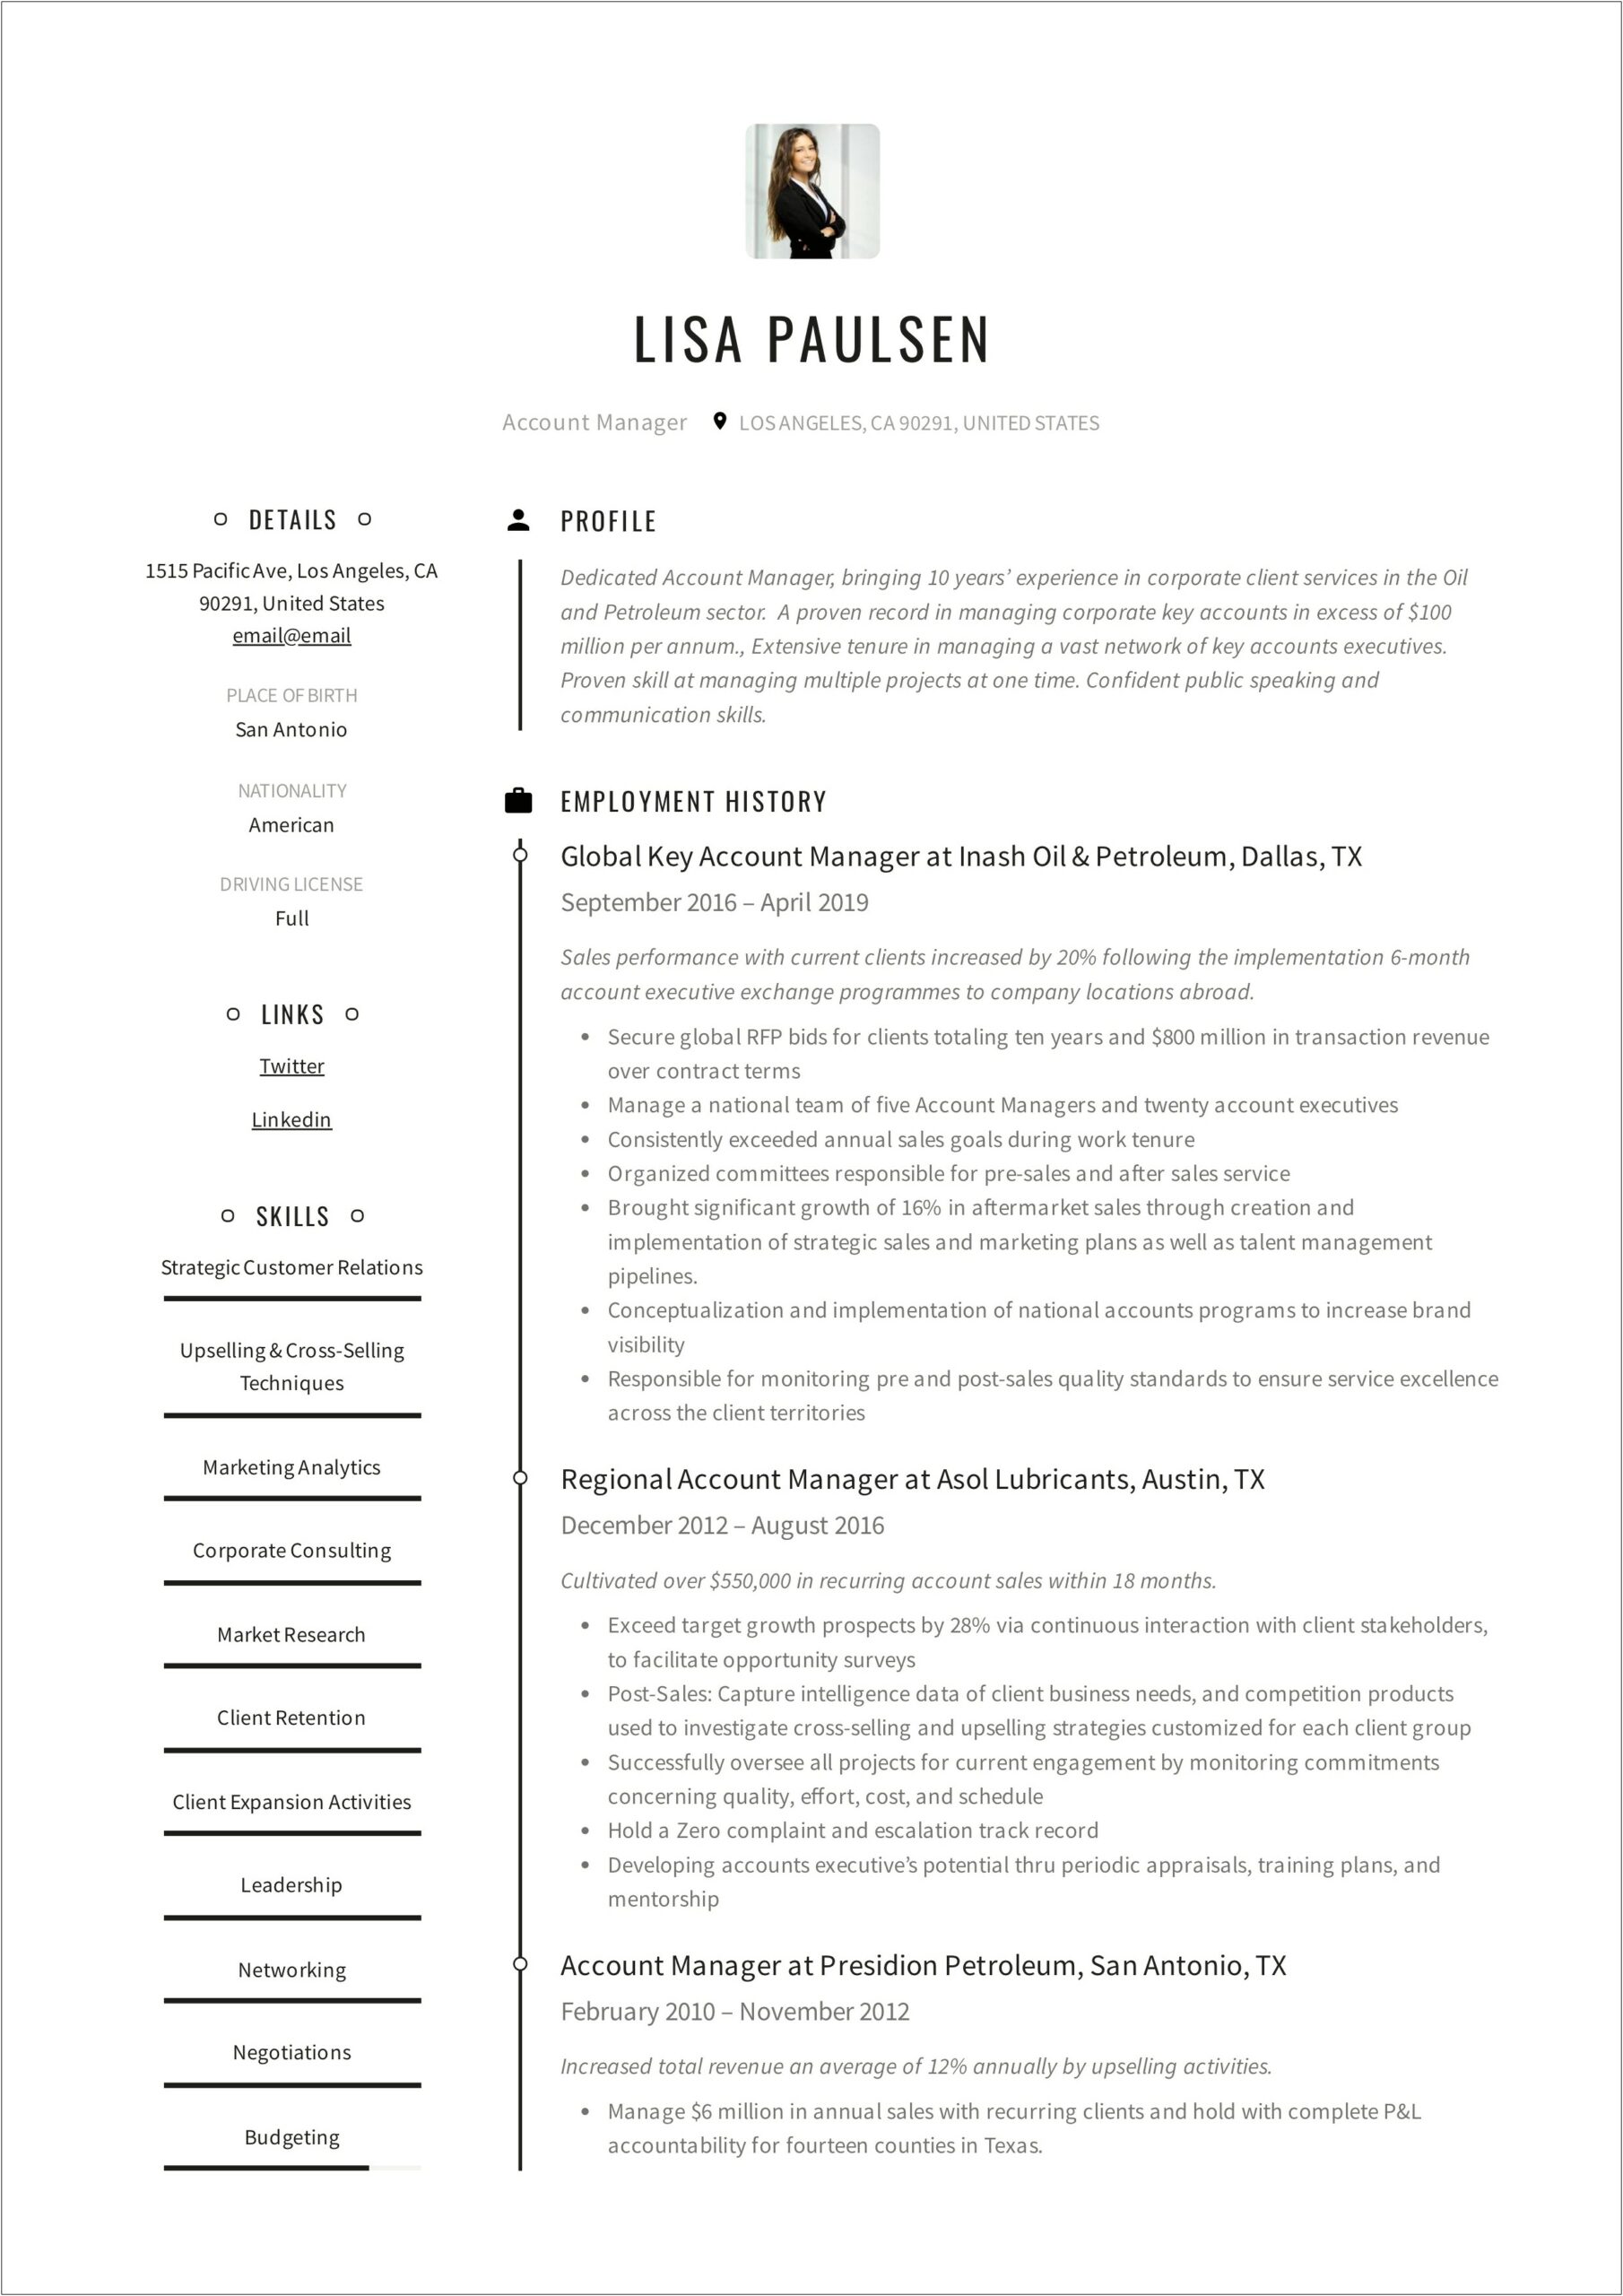 Technical Account Manager Resume Summary